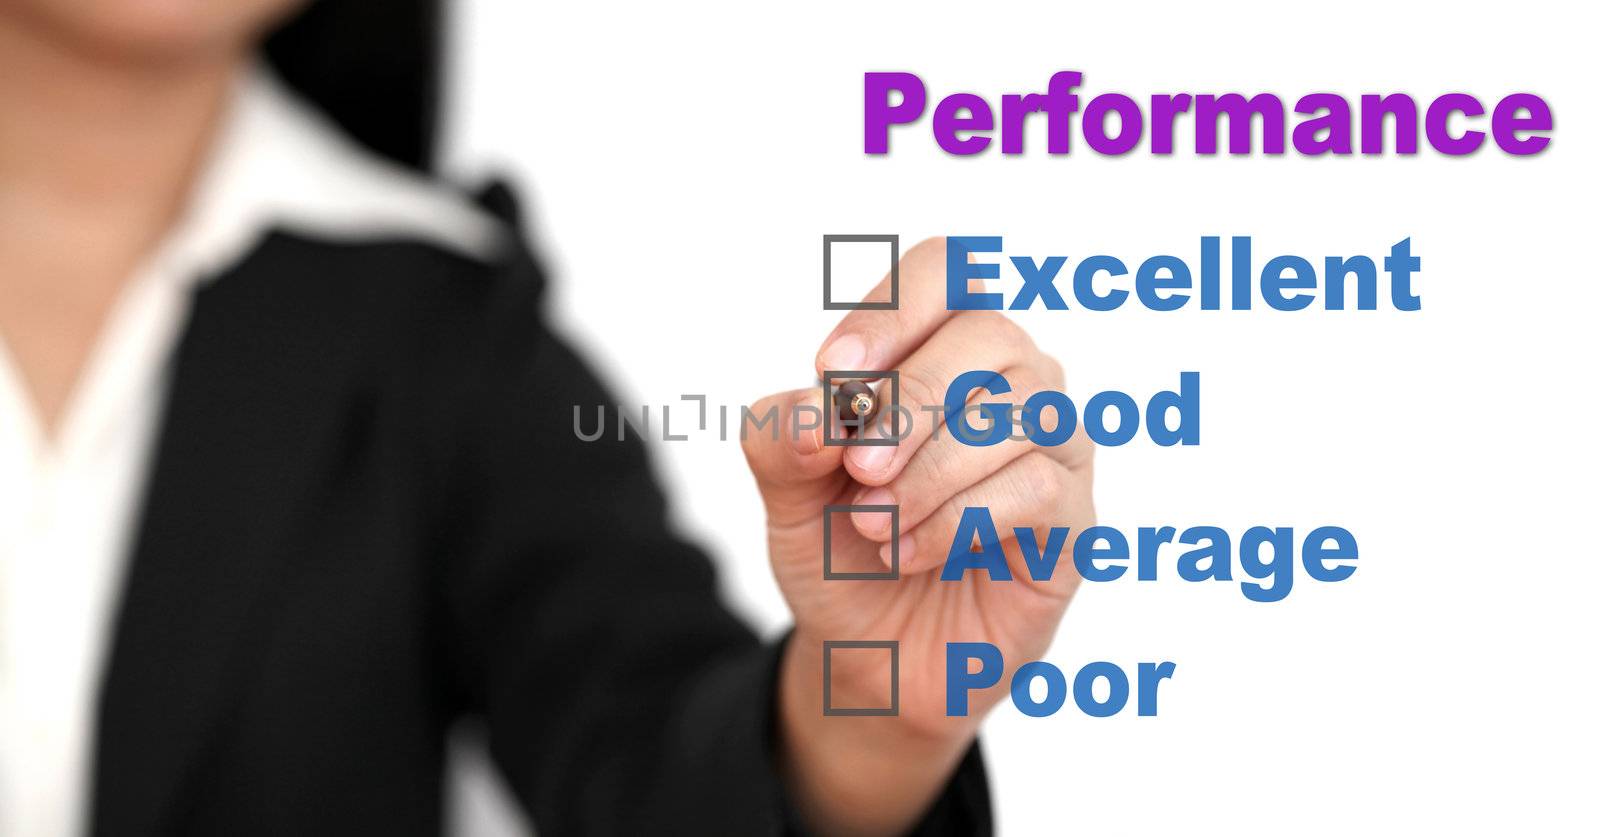 business performance checklist by vichie81